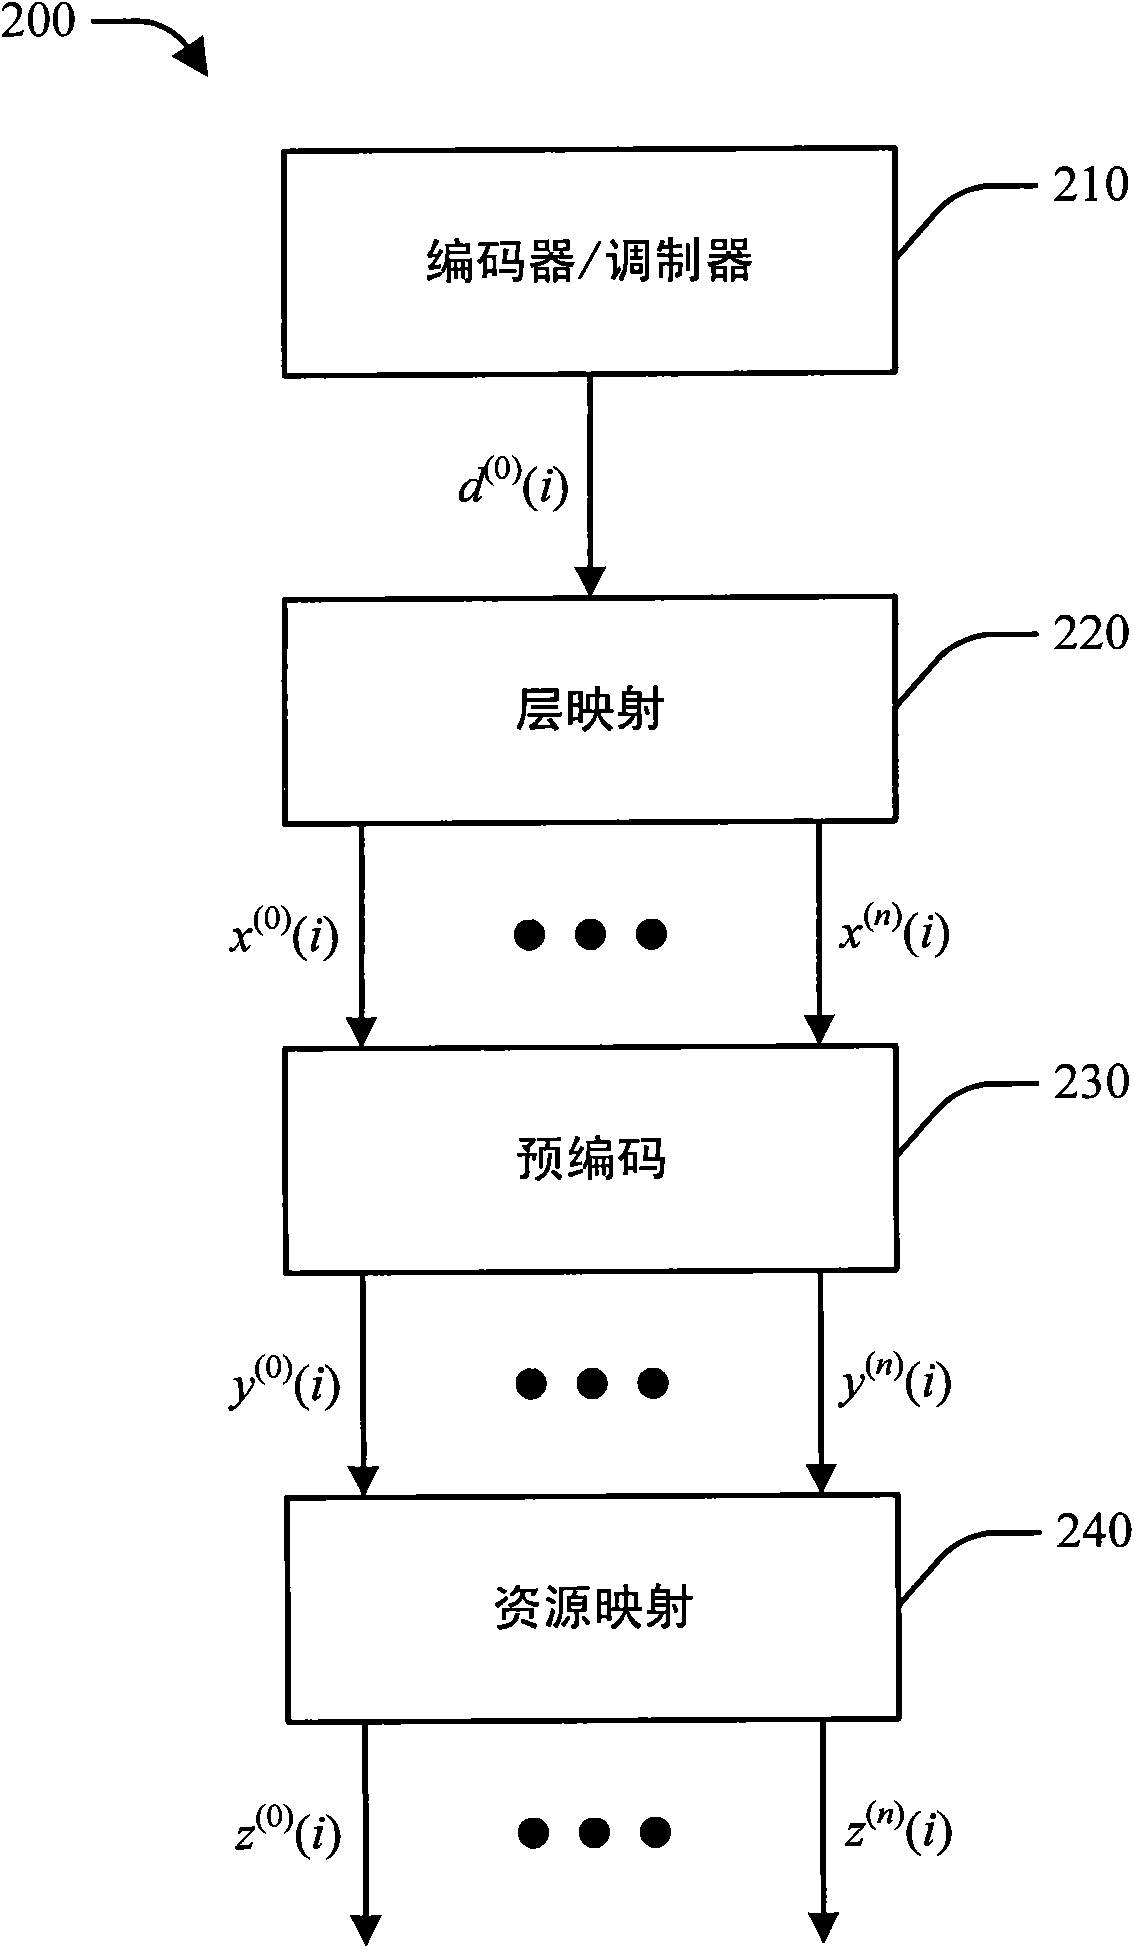 Method and apparatus for resource management in a wireless communication system